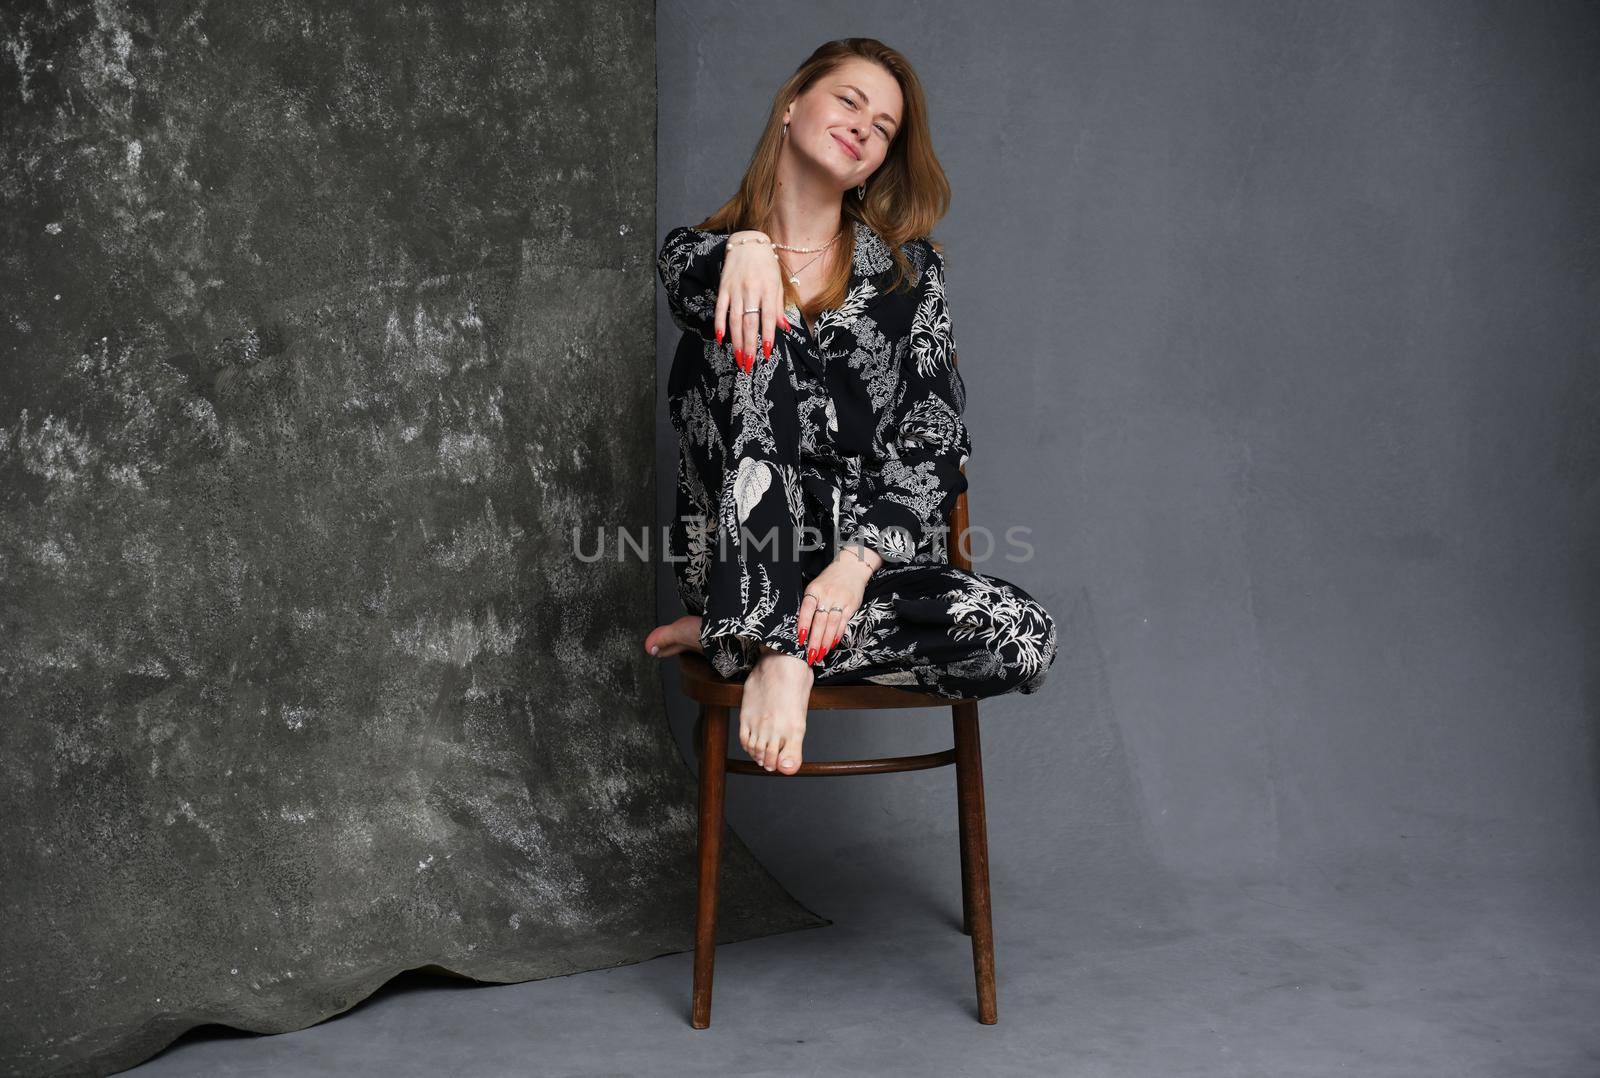 Photo in full growth caucasian girl in dark clothes sits on a chair in the studio on a gray background